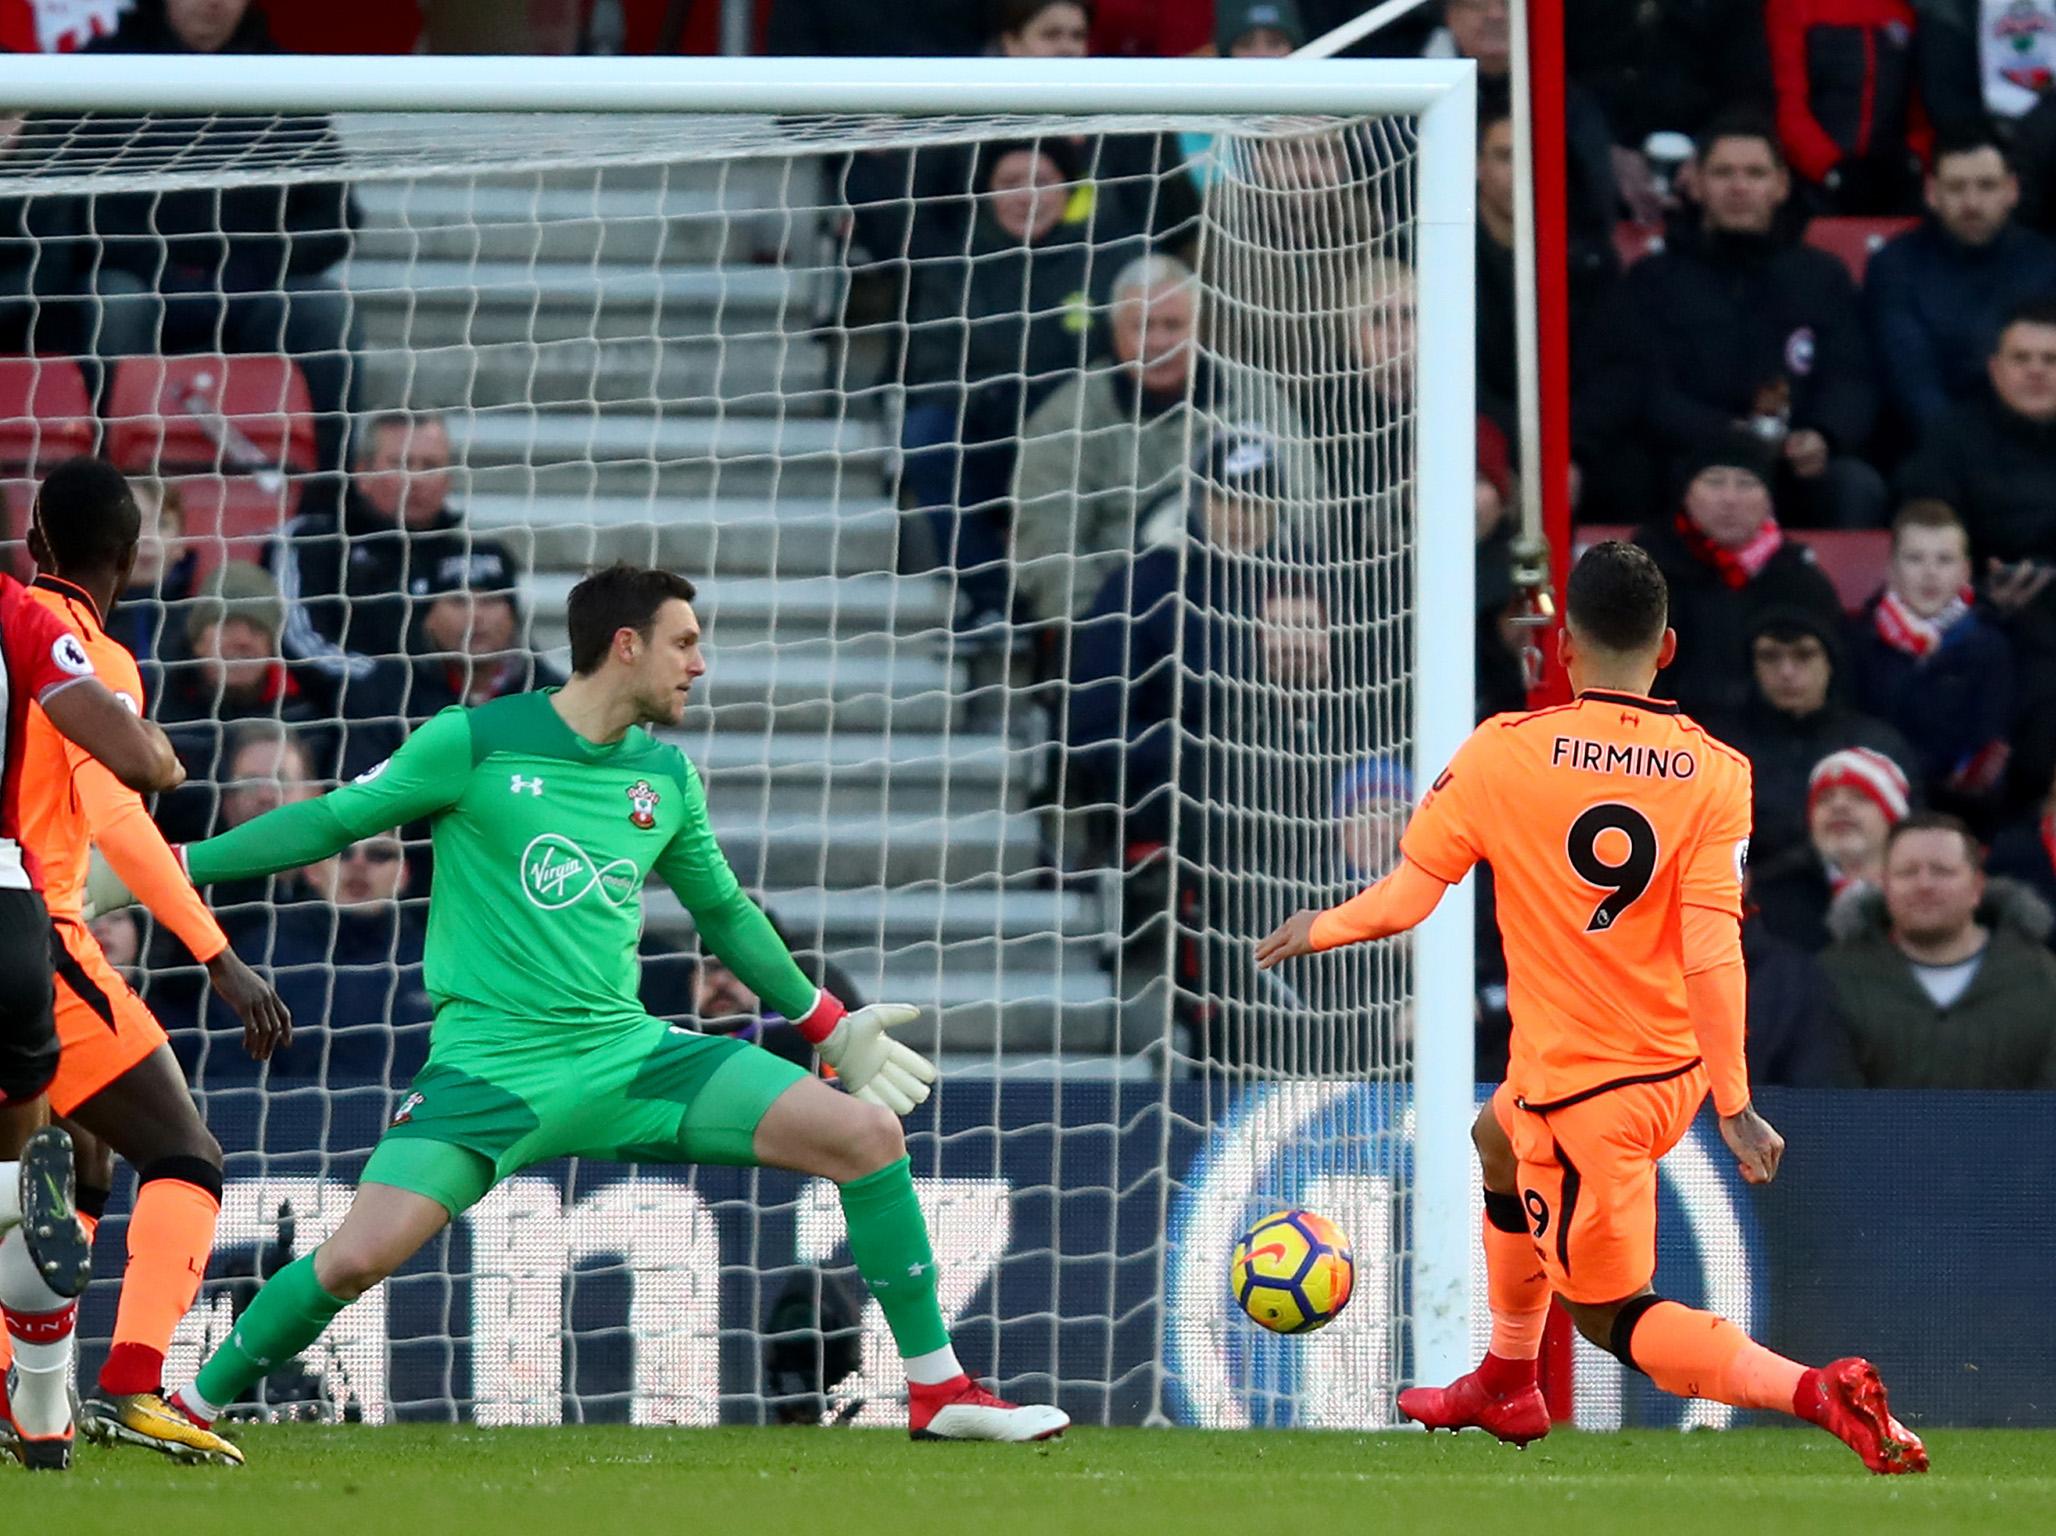 Roberto Firmino and Mohamed Salah carve Southampton apart in Liverpool stroll at St Mary's